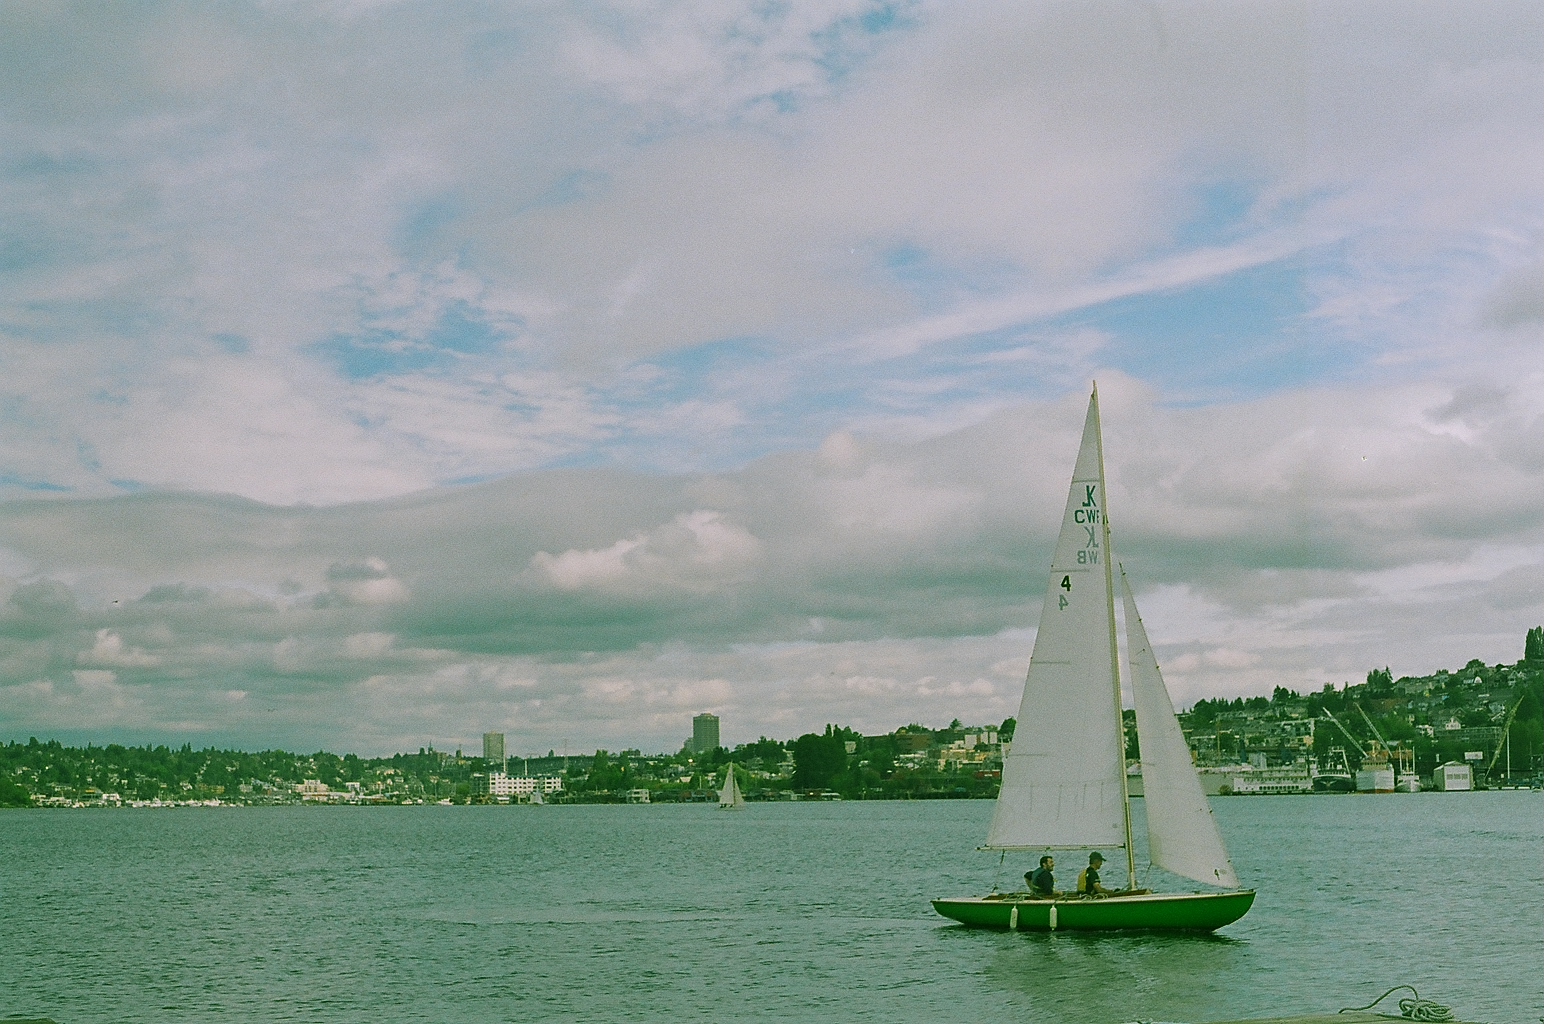  Looking north from South Lake Union  Seattle, WA     Olympus OM-1N  Expired Kodak Gold film 